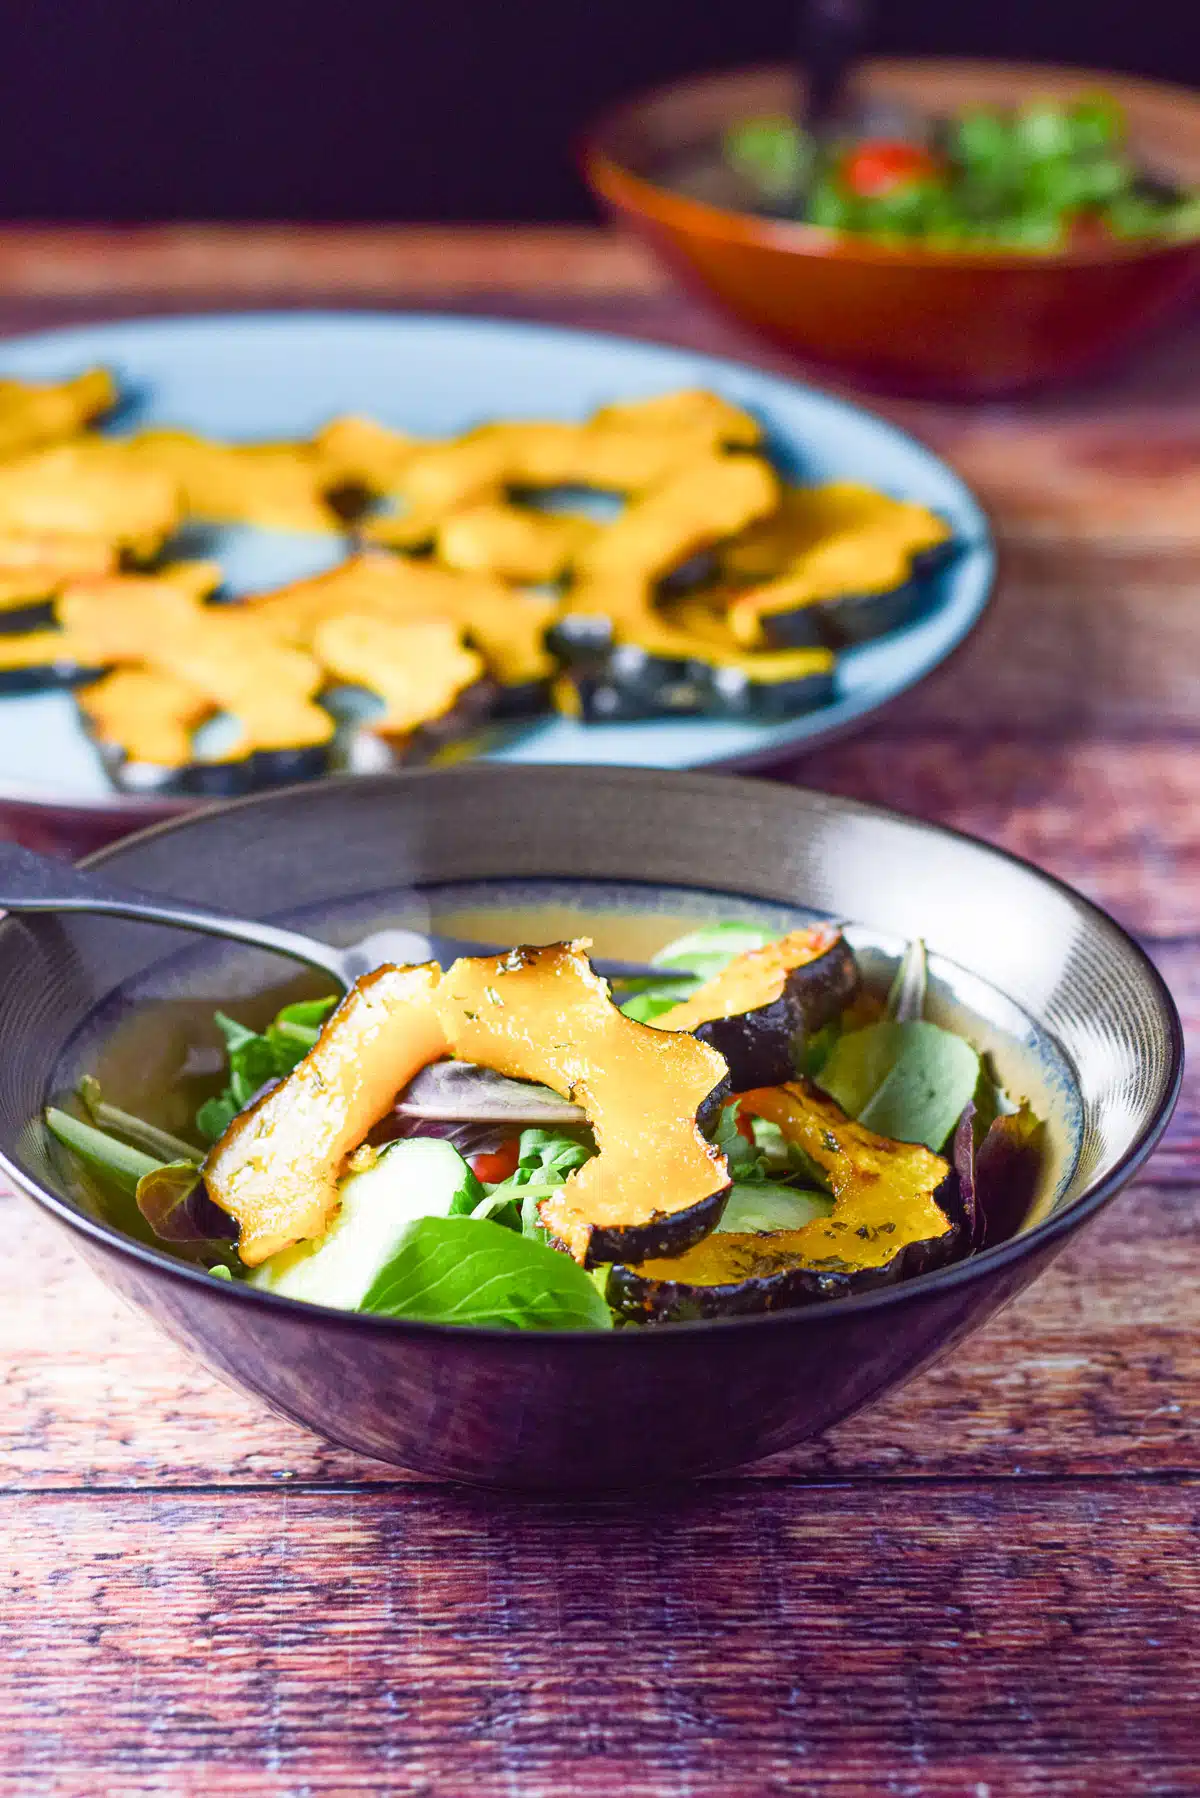 acorn squash on a salad with another salad in the background along with a plate of the vegetable